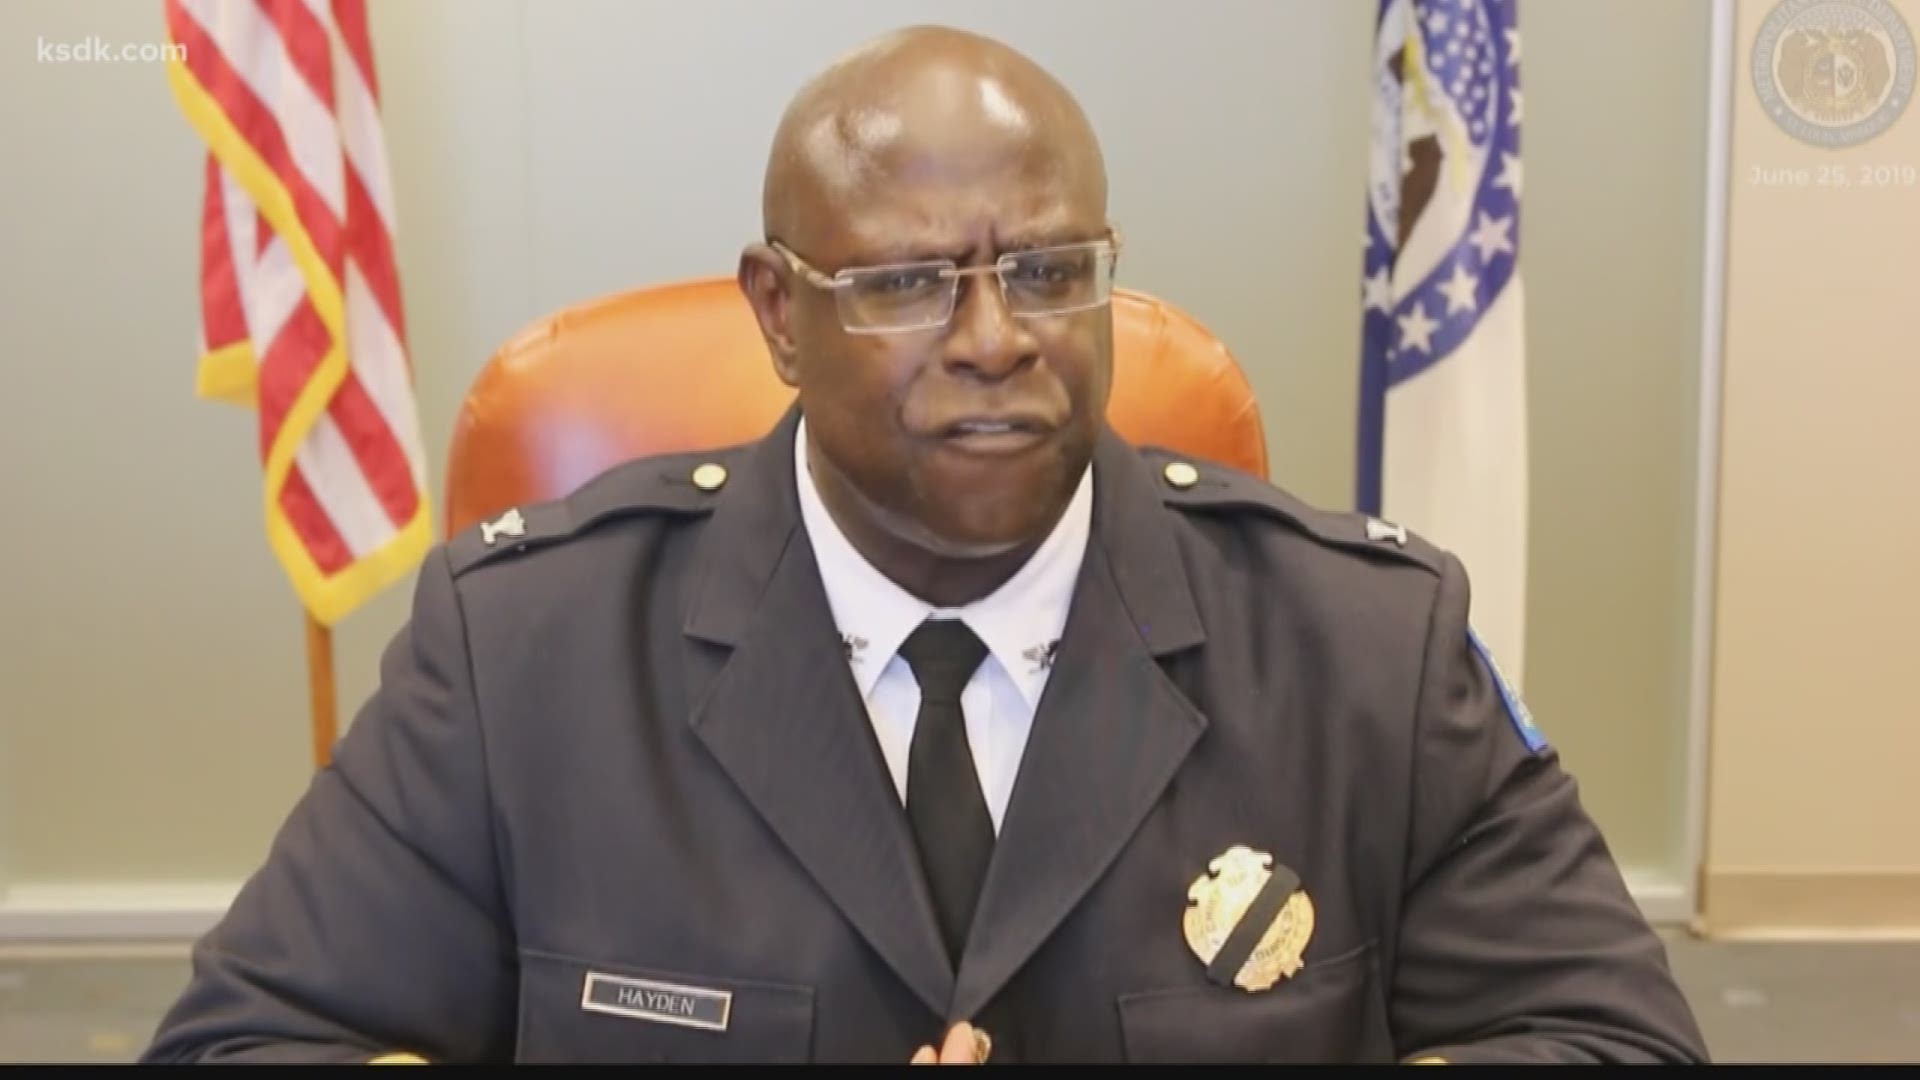 Wednesday morning, the city's police chief addressed the issue in a social media video. He said one of his main concerns -- children caught in the crossfire.